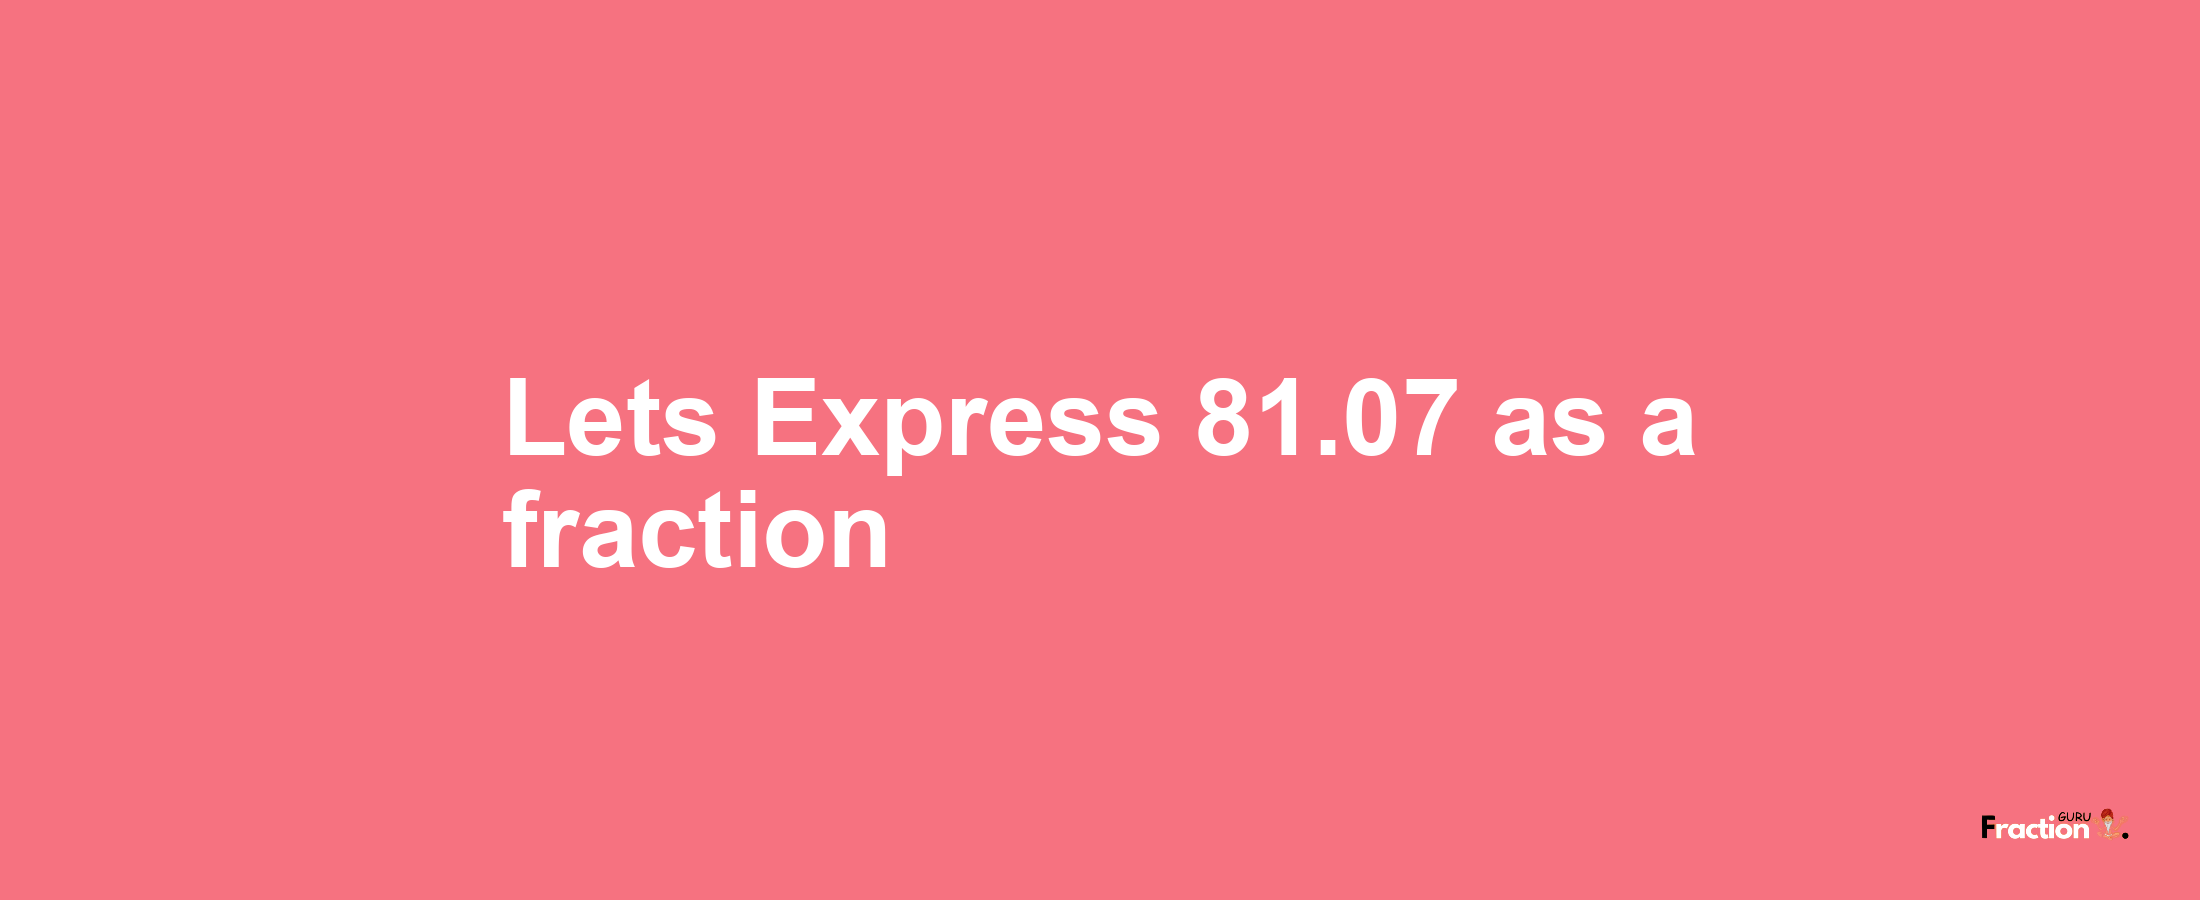 Lets Express 81.07 as afraction